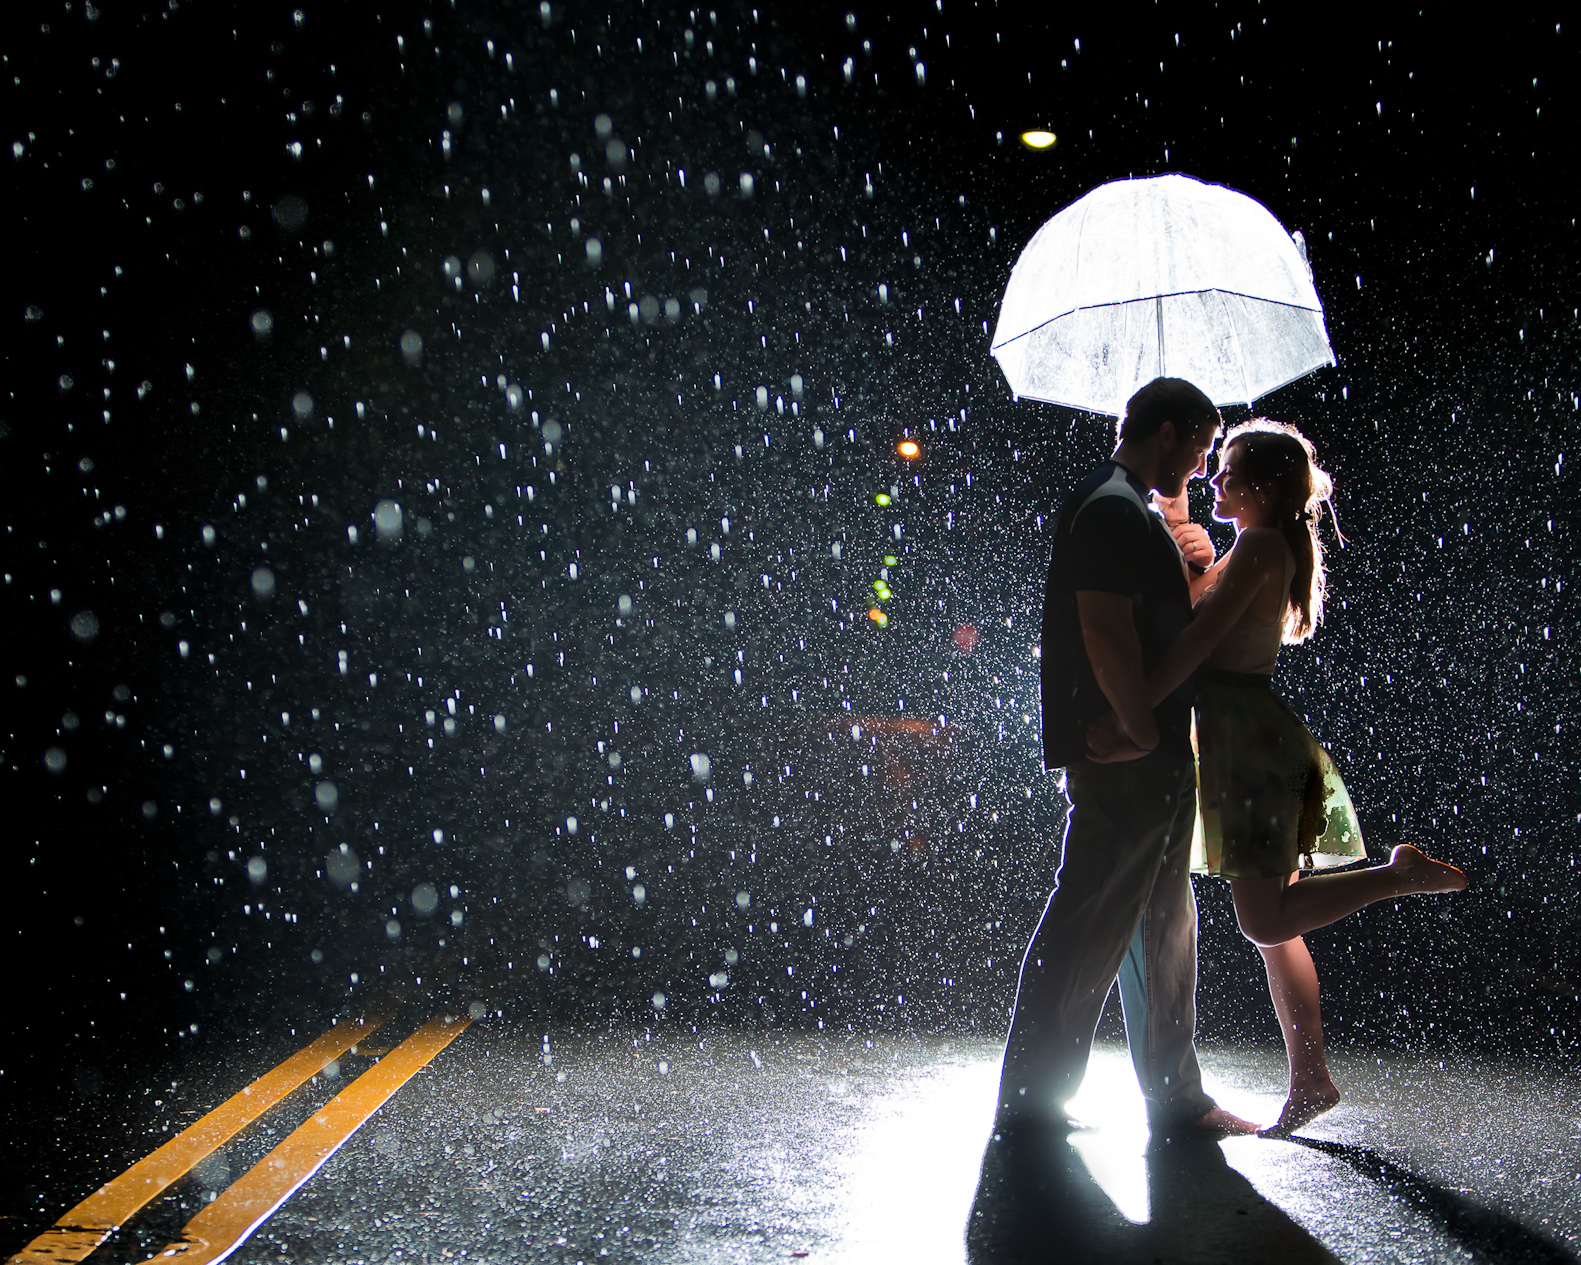 Dancing In The Rain Wallpapers High Quality | Download Free